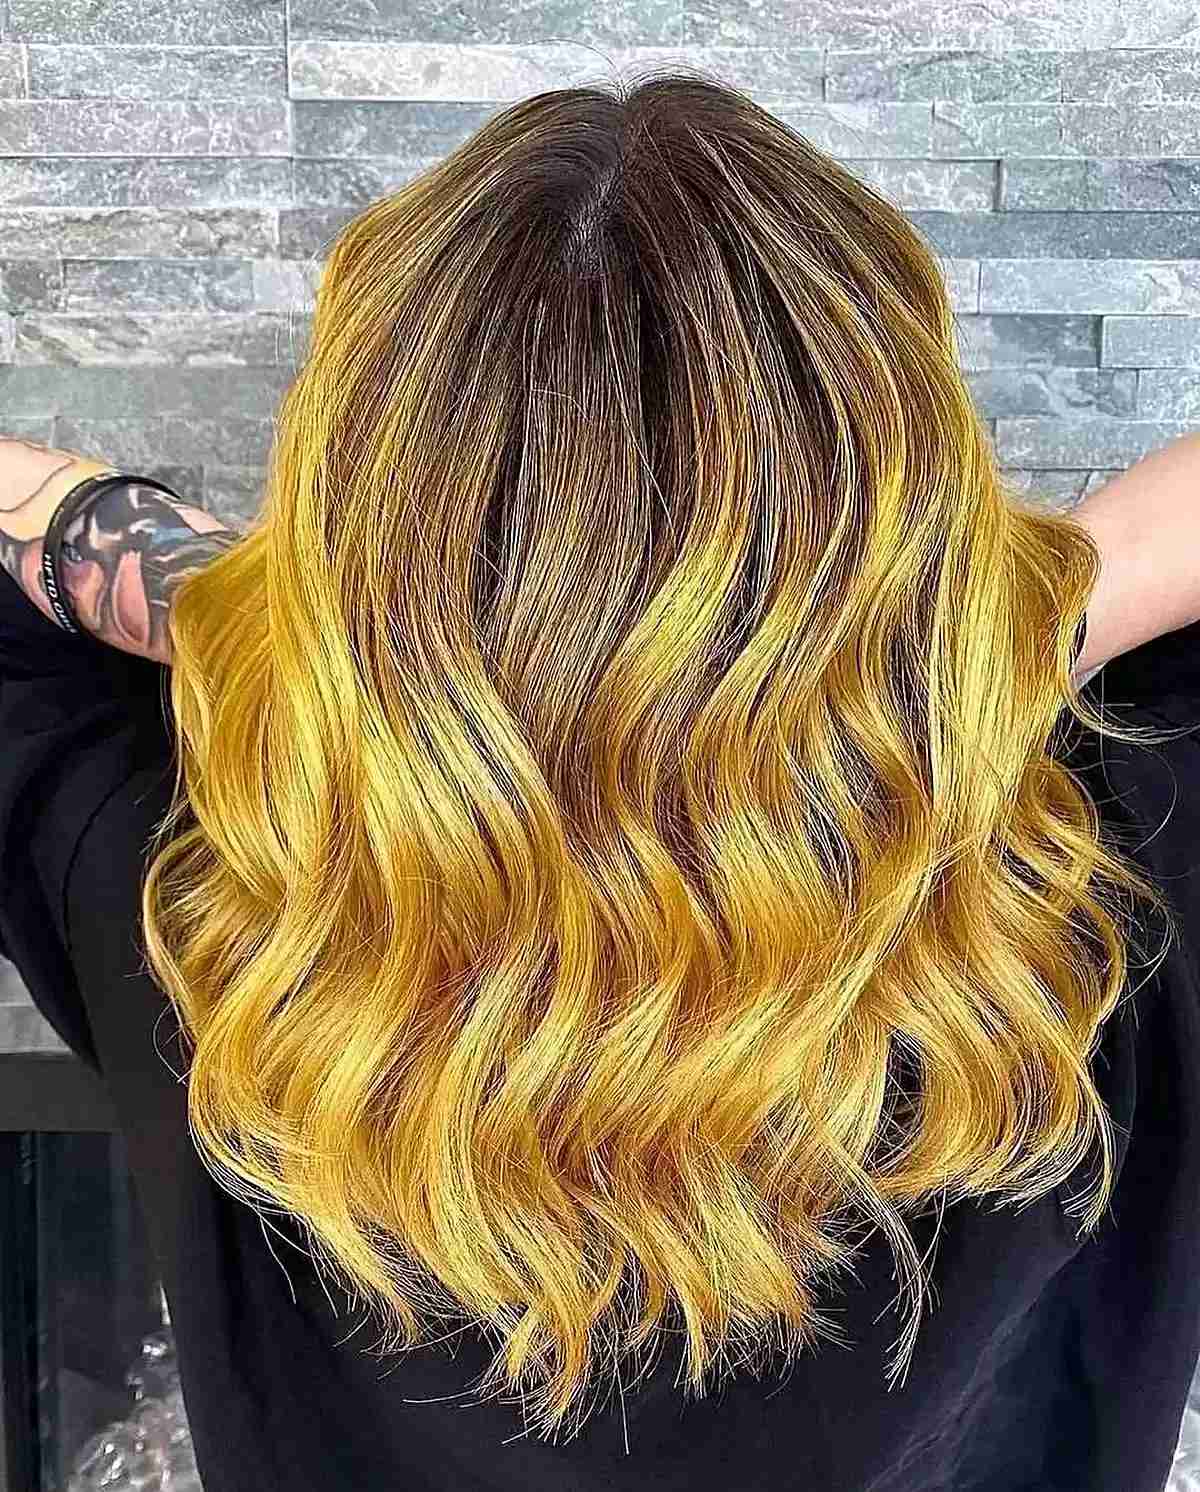 Dark Rooted Mustard Yellow Hair for women with a medium-length haircut